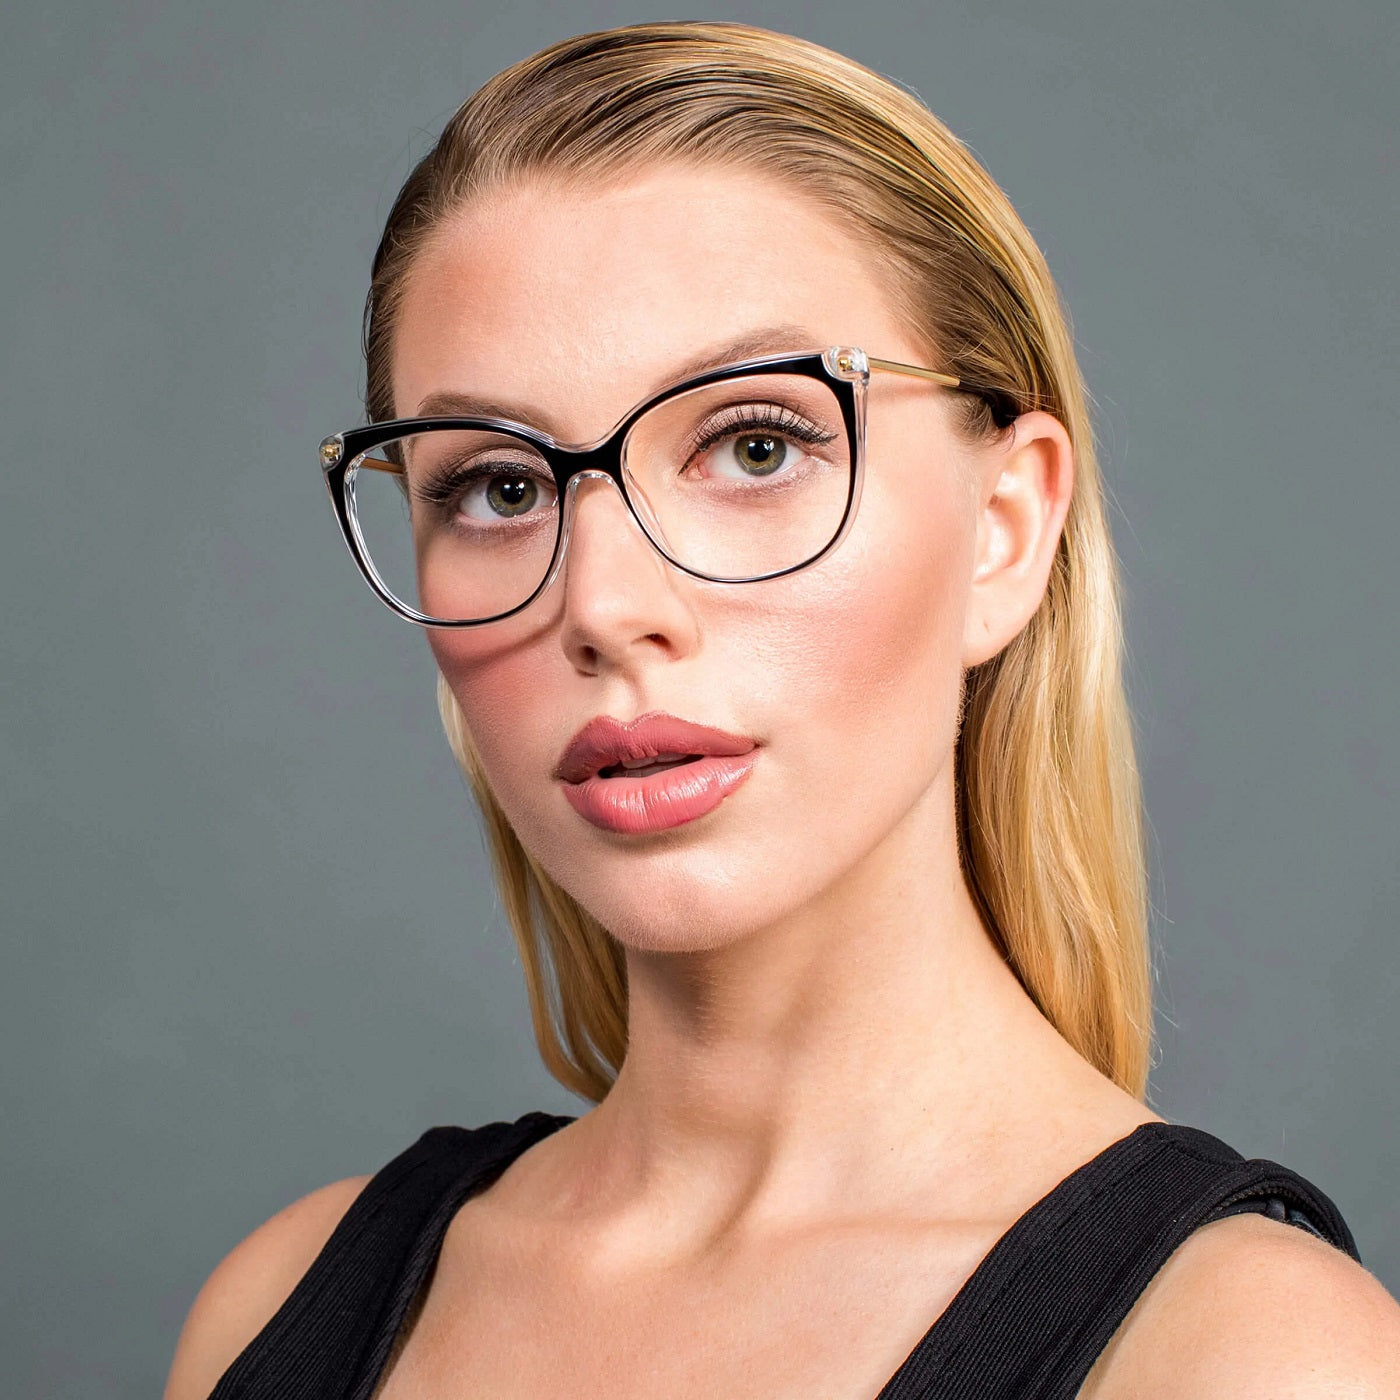 5 Things You Need to Know Before Buying Progressive Lenses